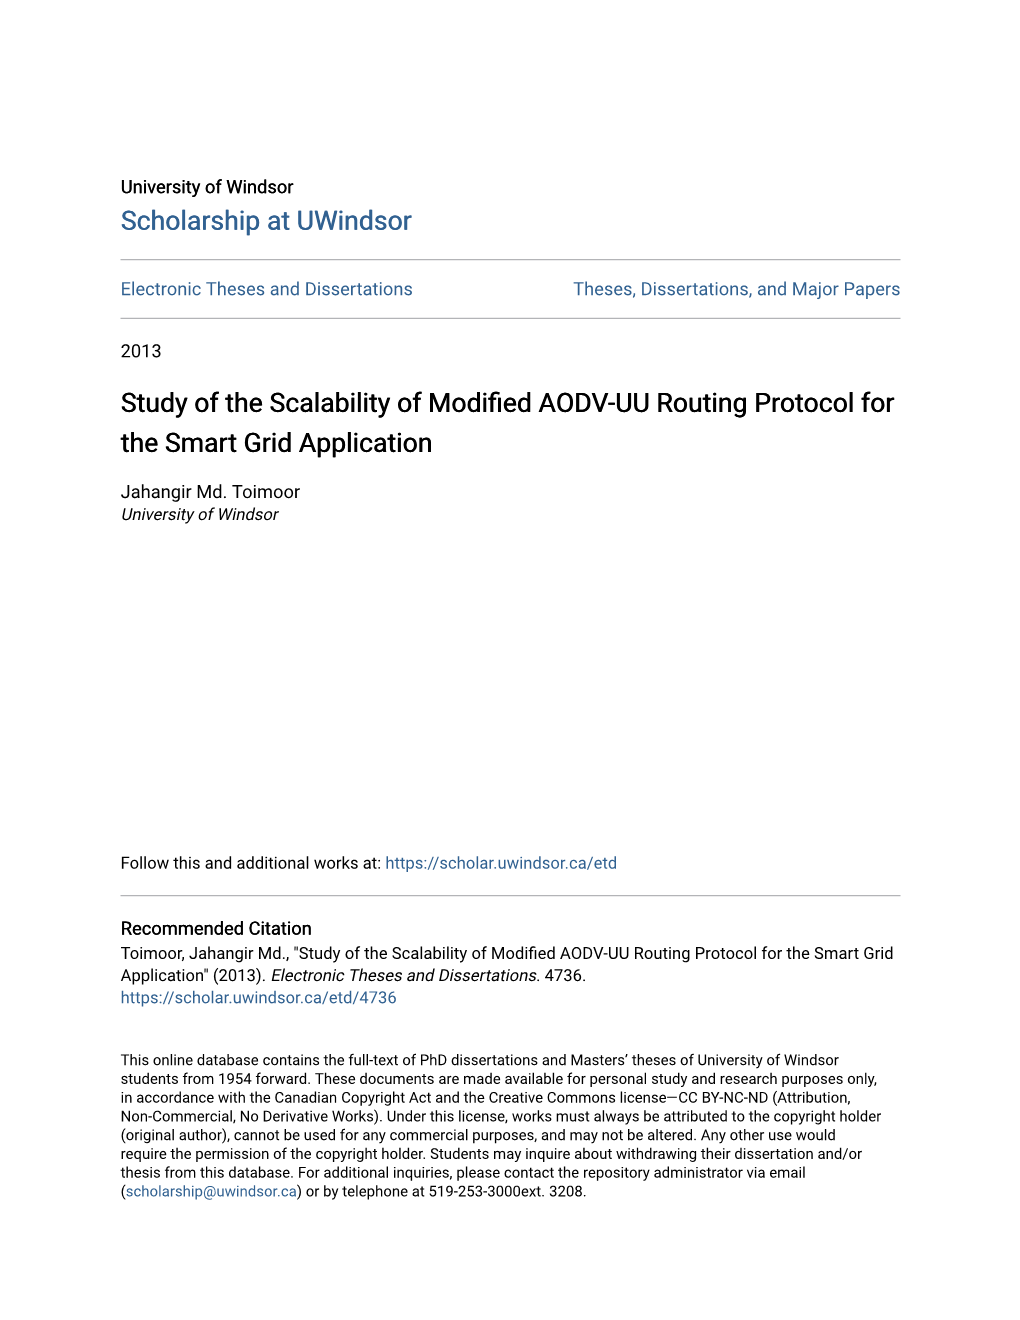 Study of the Scalability of Modified AODV-UU Routing Protocol for the Smart Grid Application